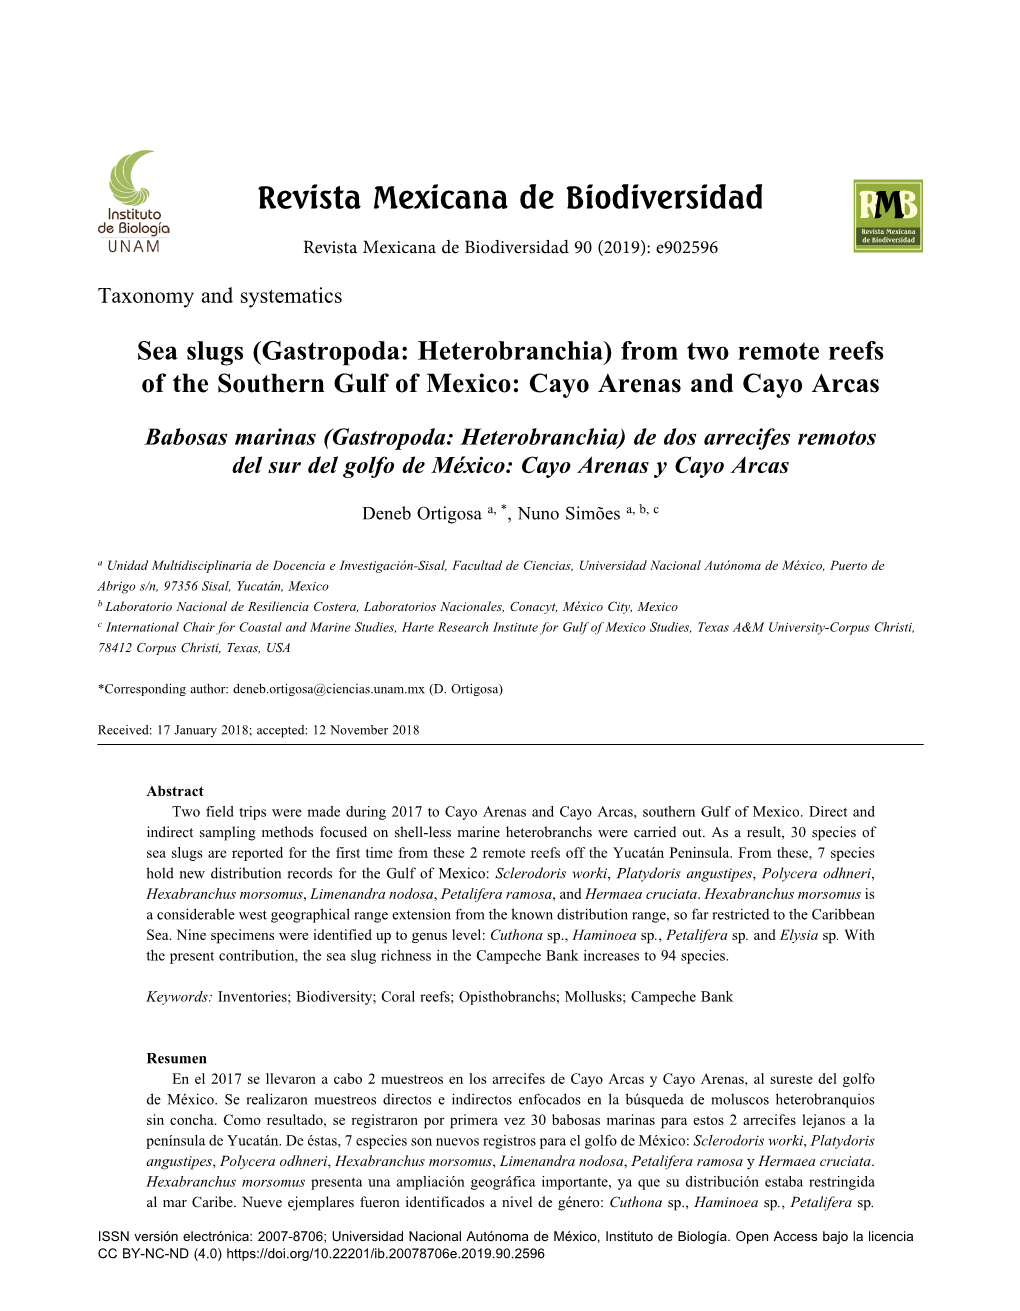 Sea Slugs (Gastropoda: Heterobranchia) from Two Remote Reefs of the Southern Gulf of Mexico: Cayo Arenas and Cayo Arcas